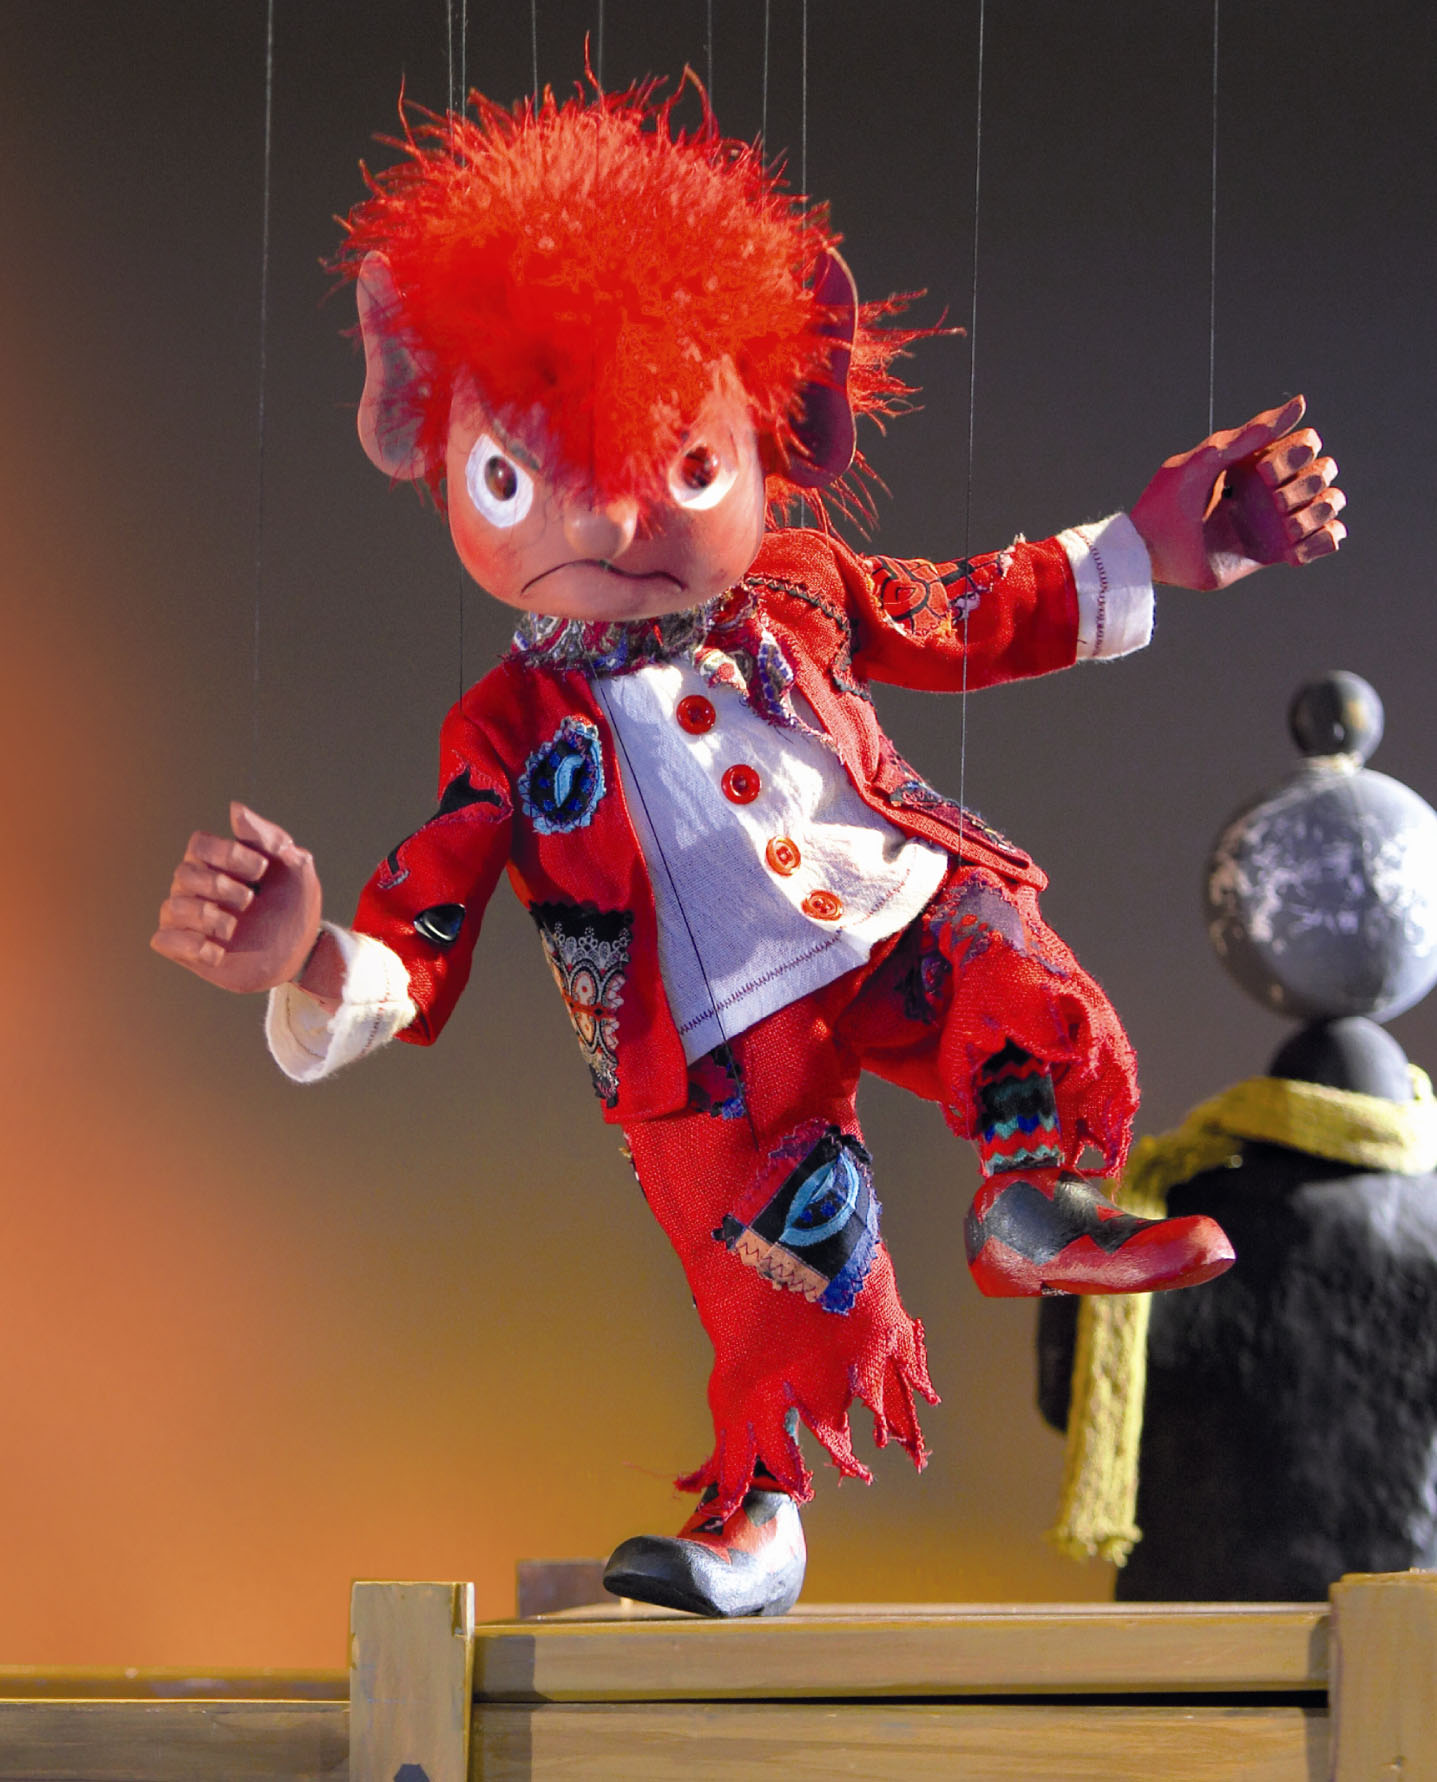 Protagonist “Zornibold”, representing the basic emotion “anger” of the interactive story ‘Puppet in the Box Story’ (the puppets were manufactured by the Augsburger Puppenkiste). *Image and copy rights: Papilio gGmbH
